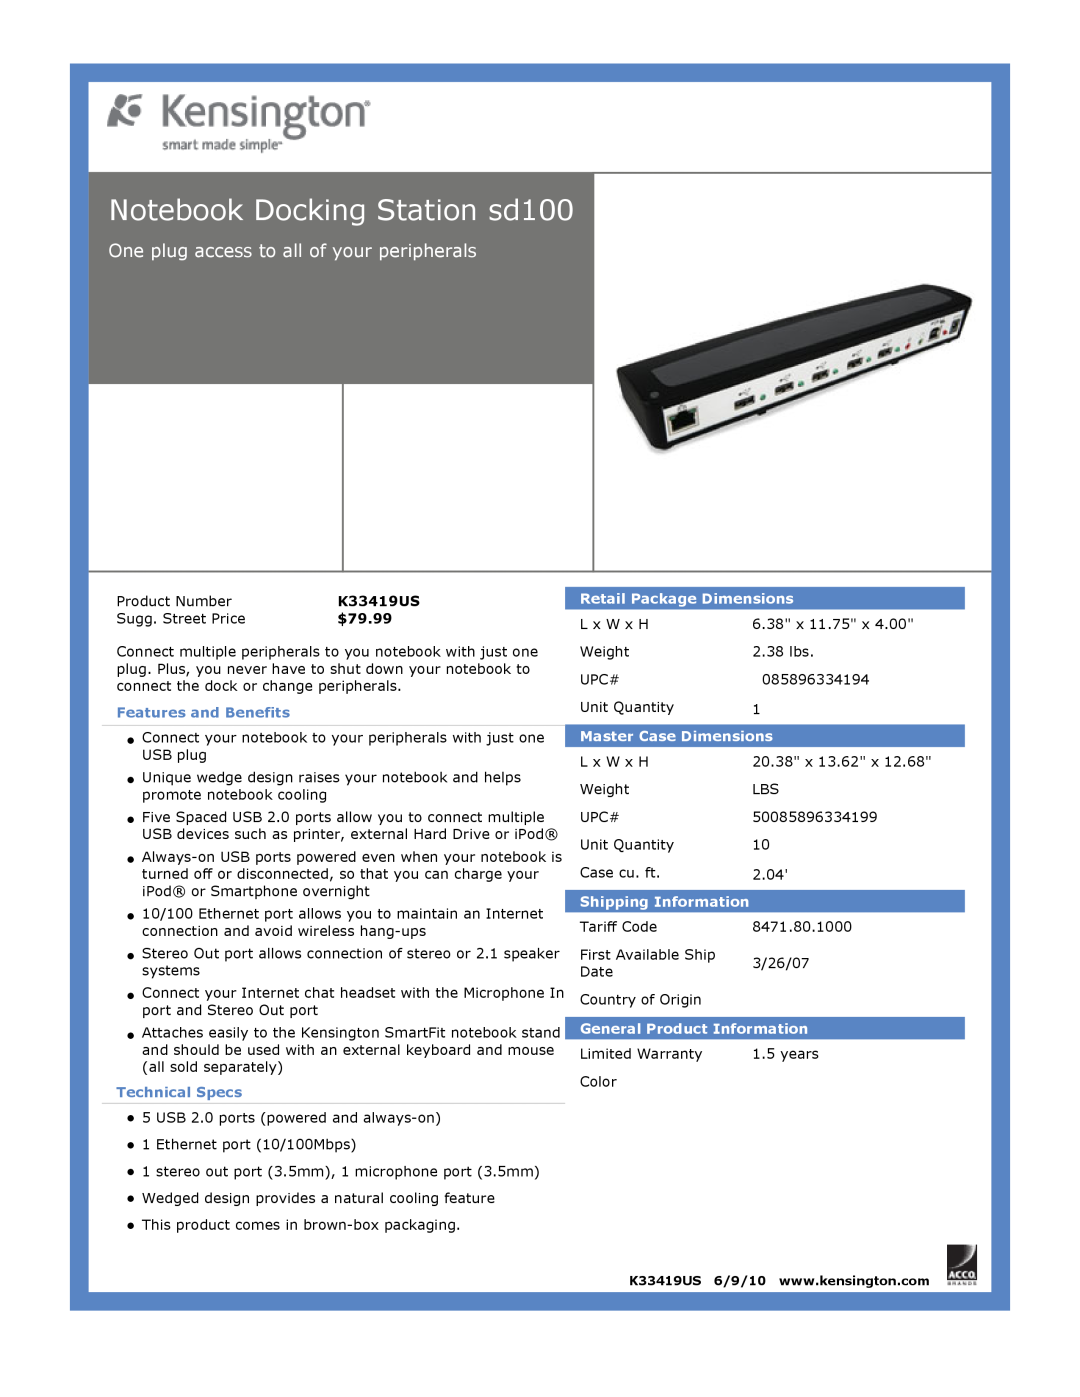 Kensington EU64325 Notebook Docking Station sd100, One plug access to all of your peripherals, $79.99, Technical Specs 